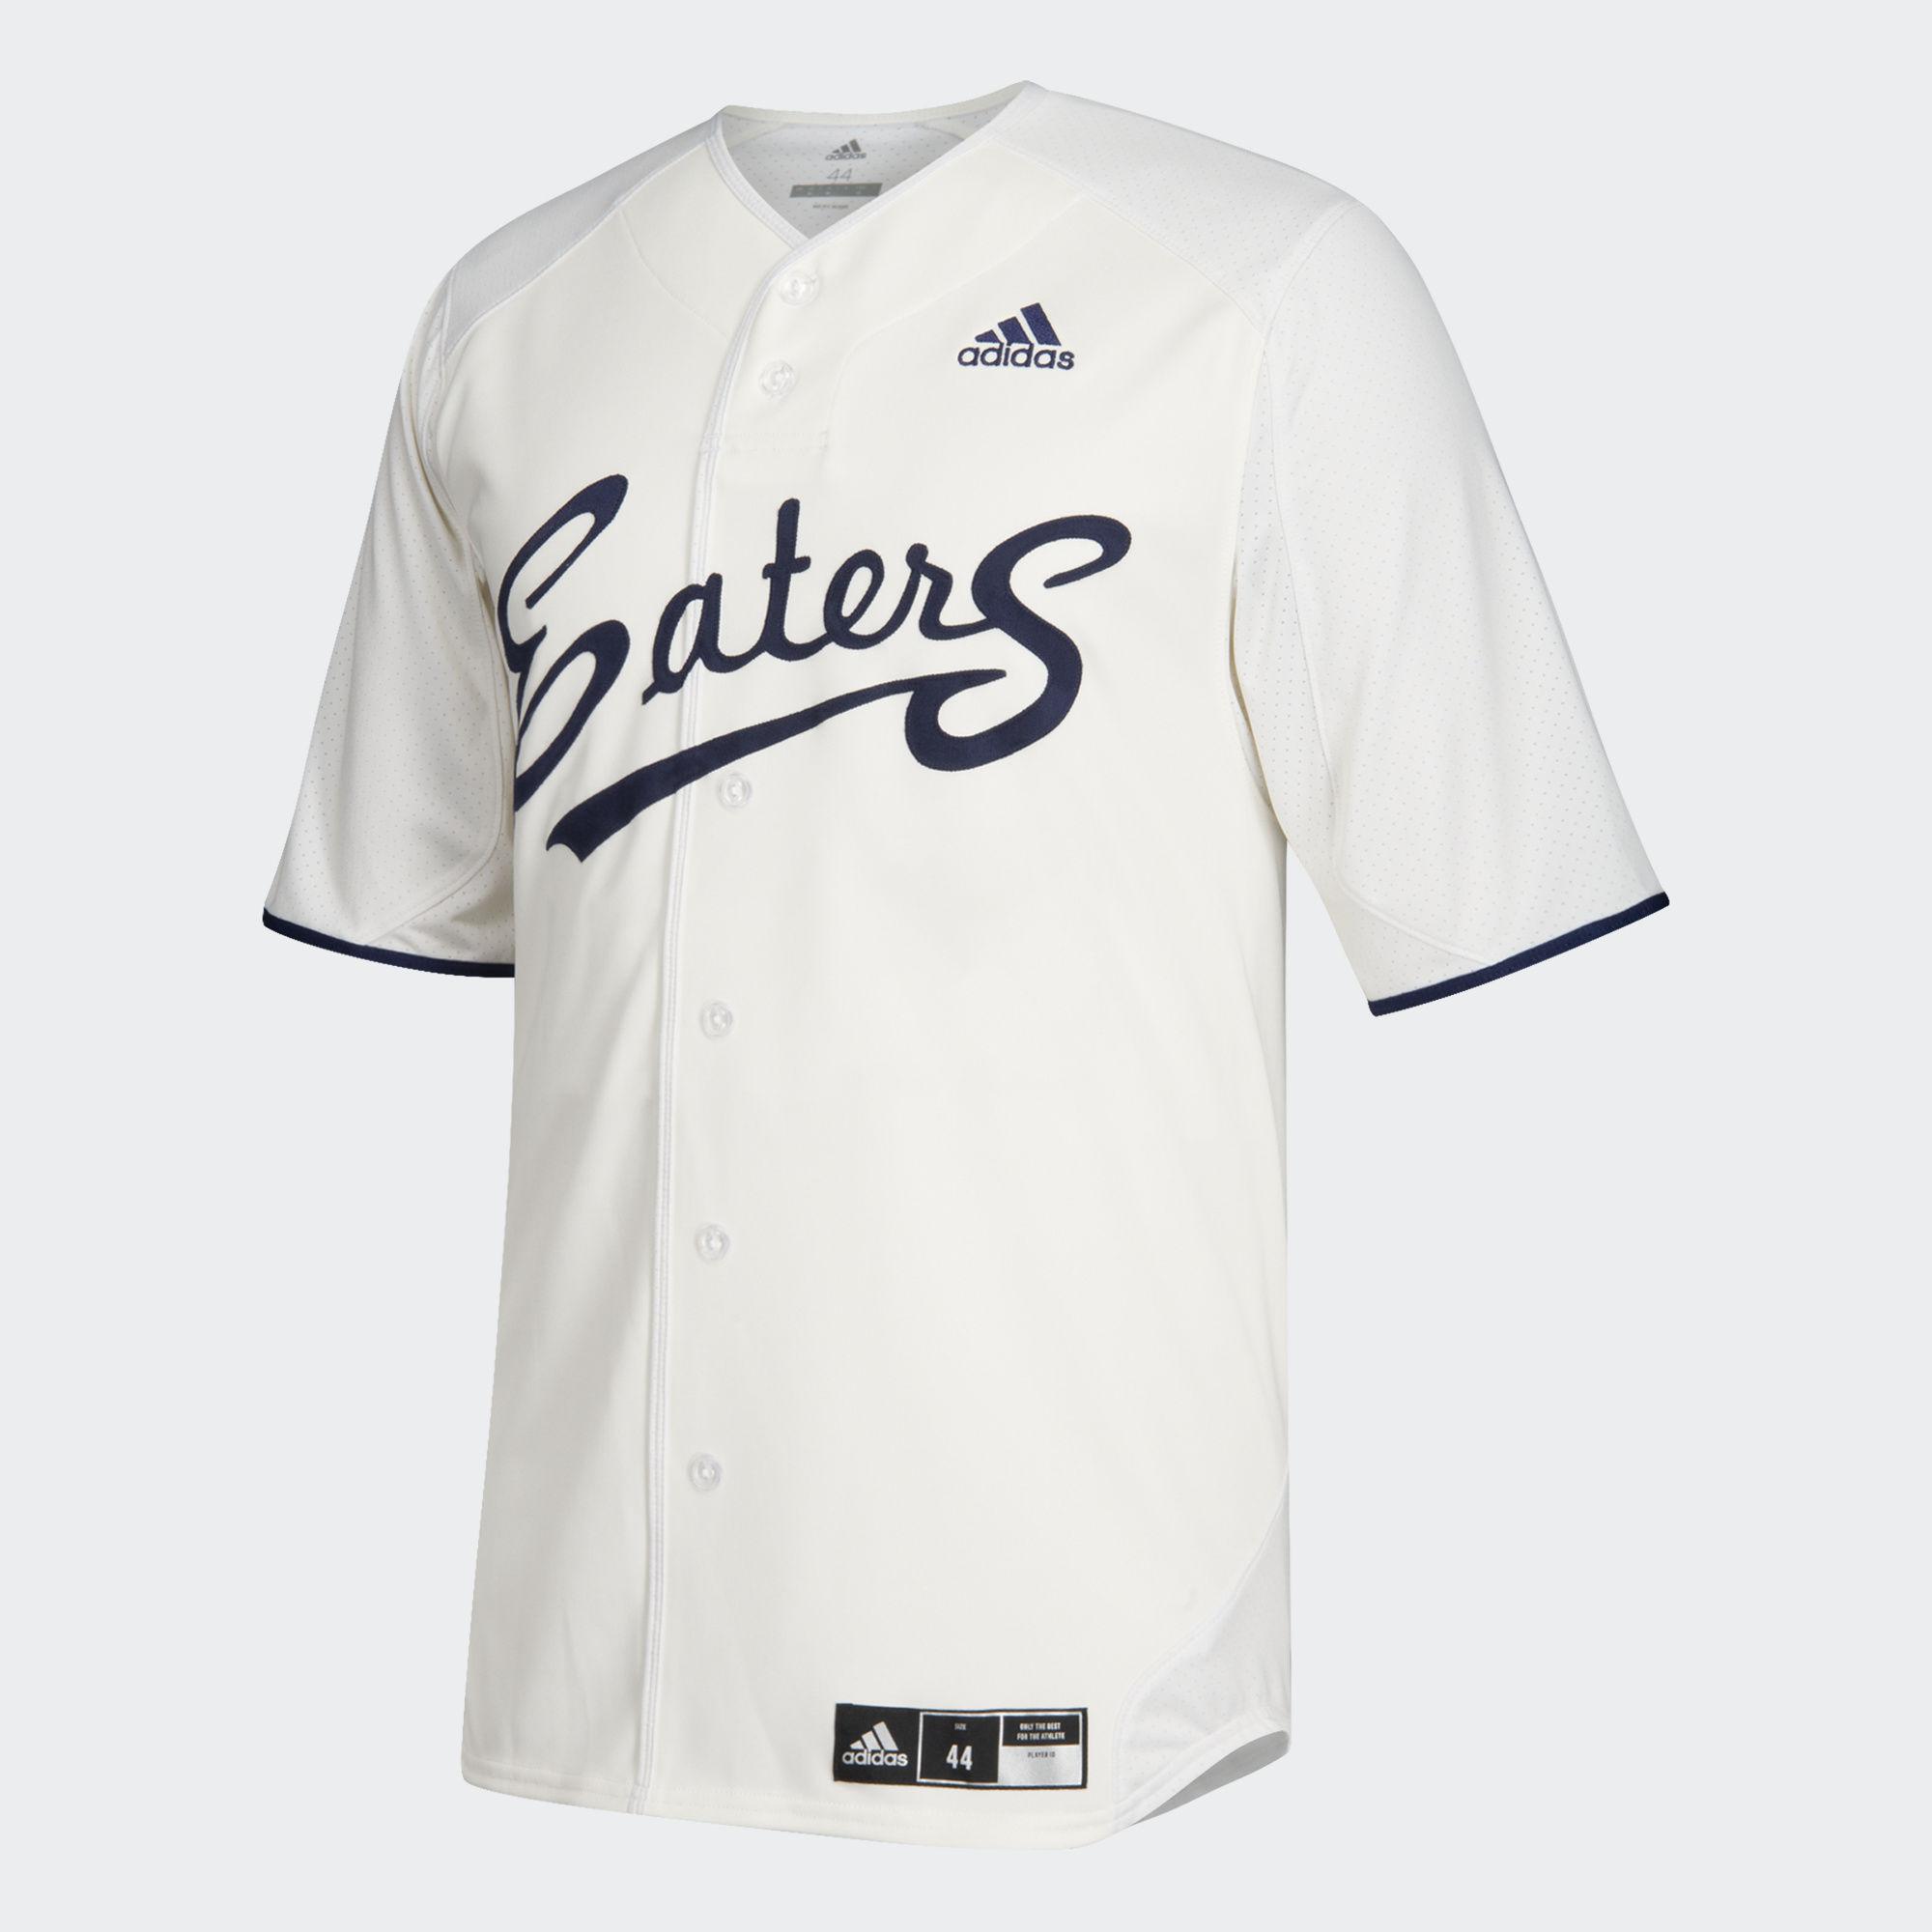 Lyst - adidas Baseball Jersey Uc Irvine in Natural for Men